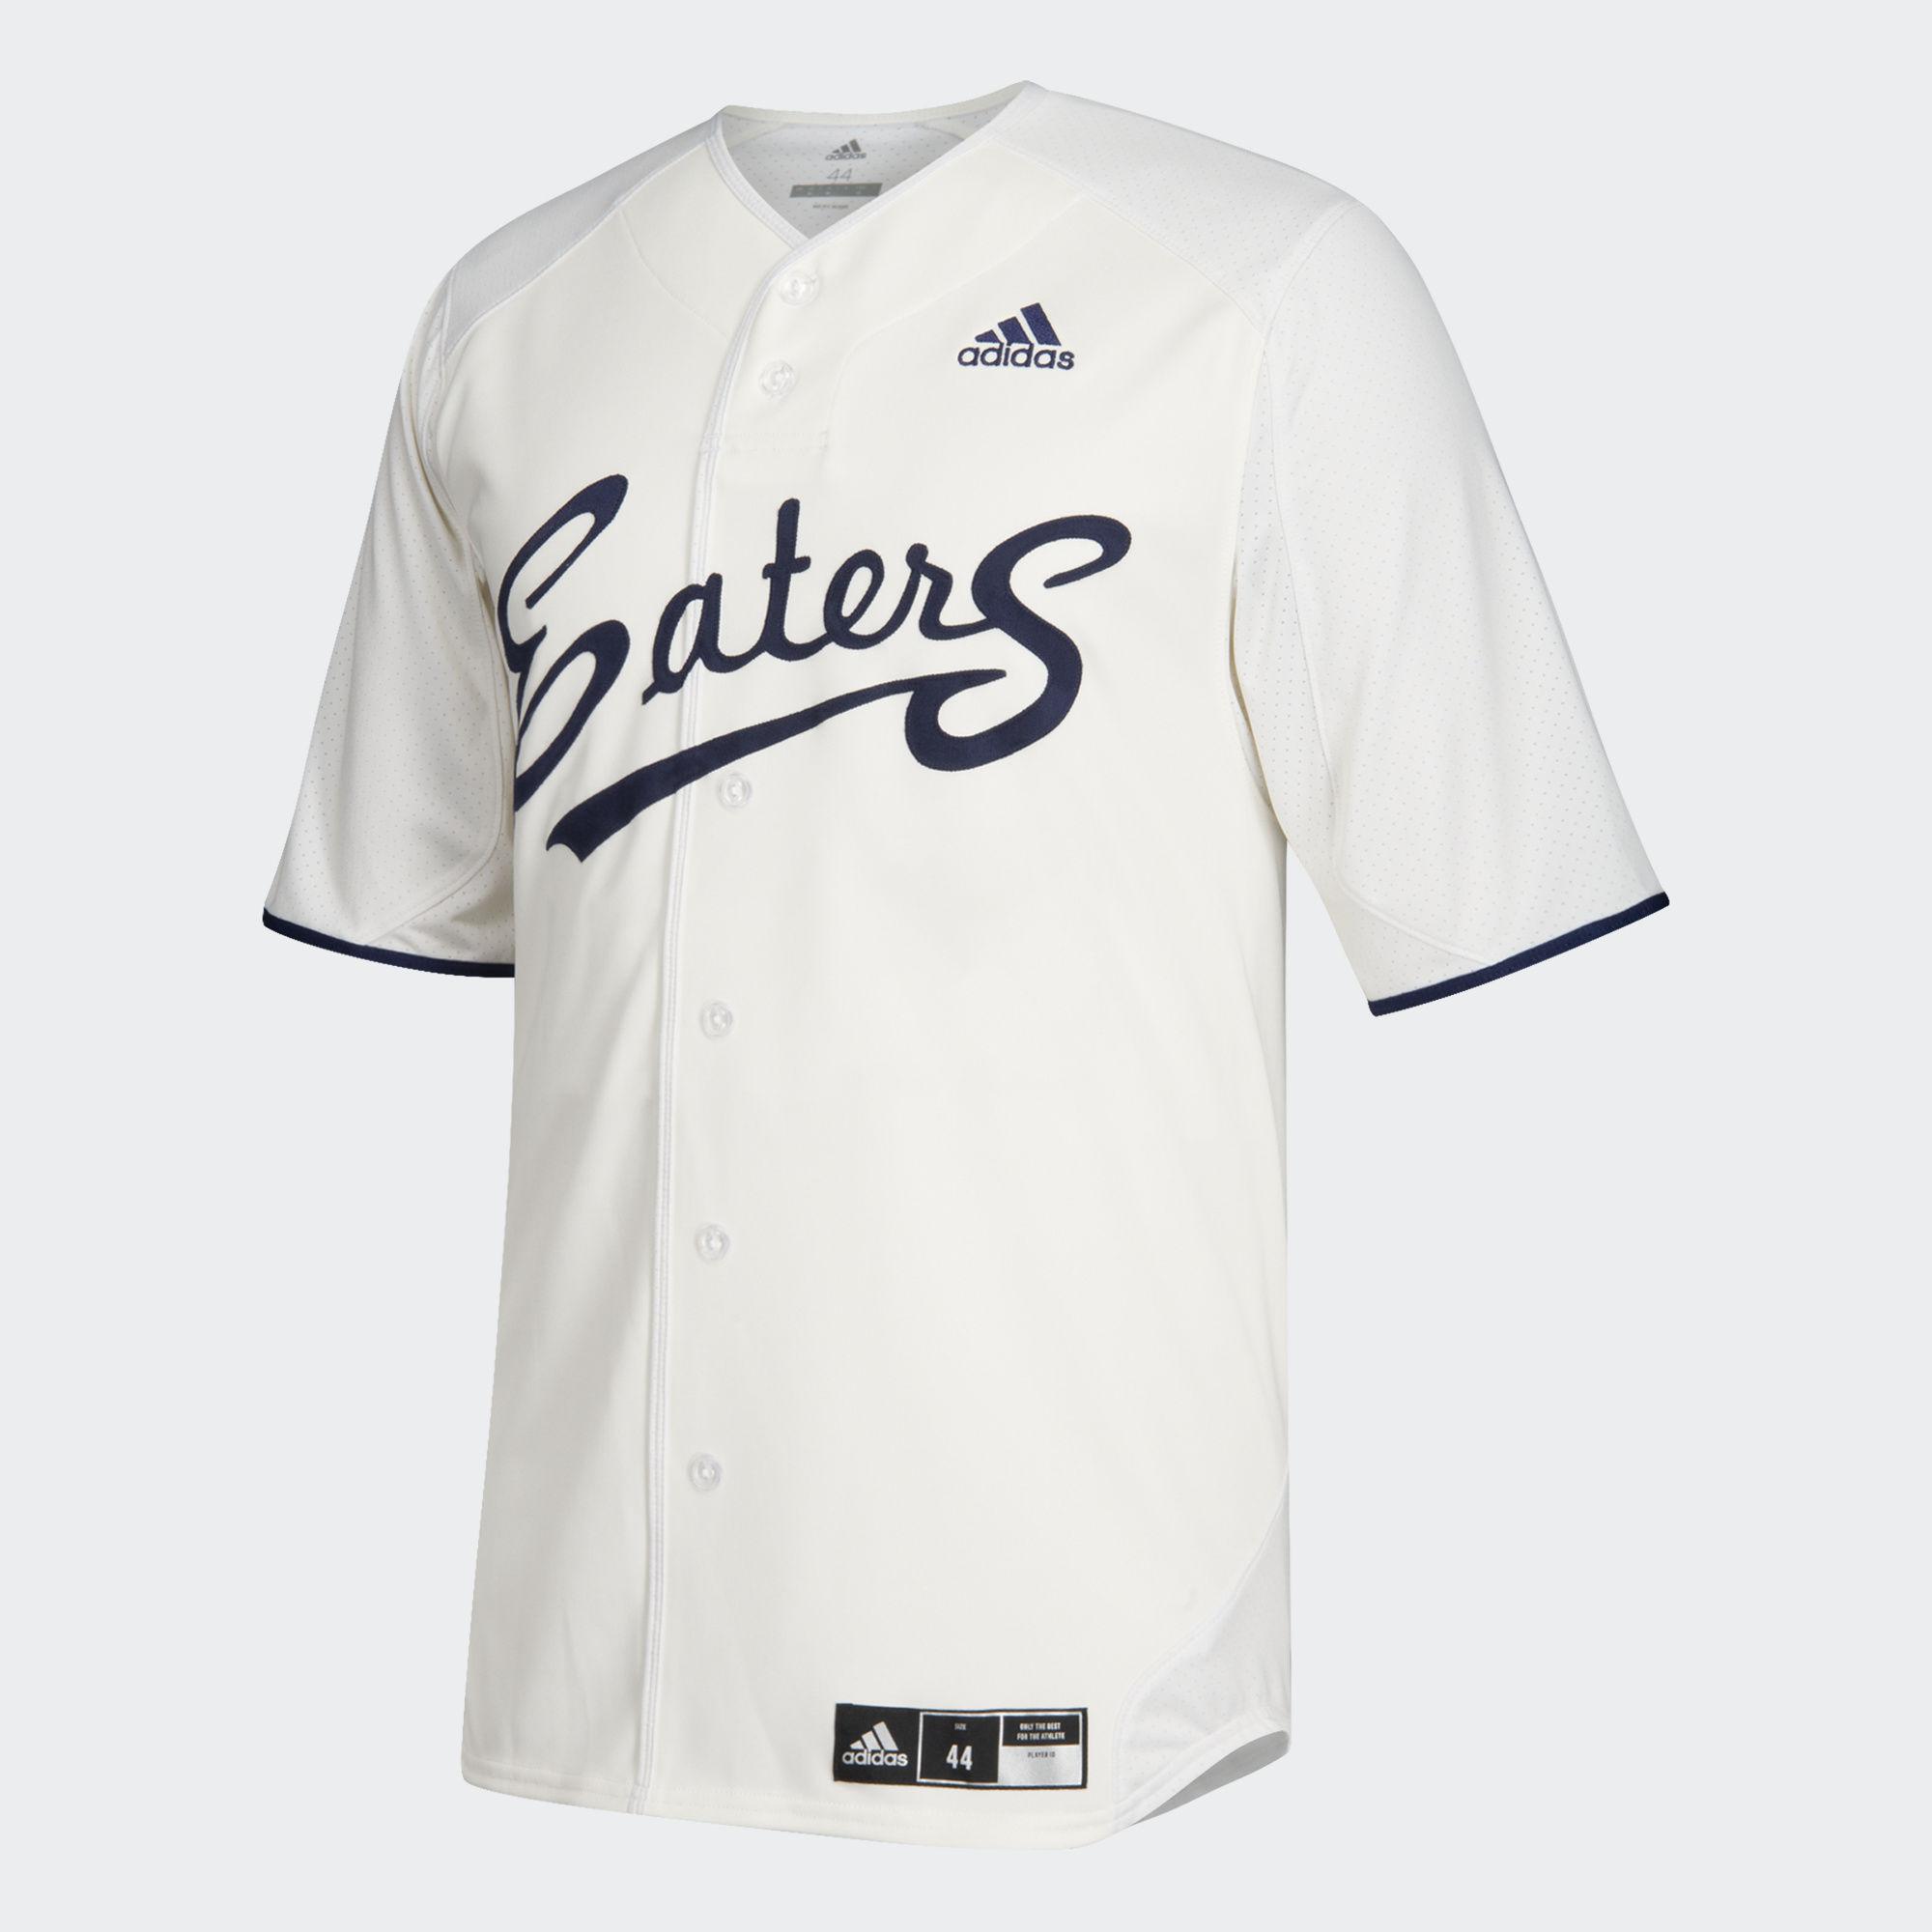 Lyst - adidas Baseball Jersey Uc Irvine in Natural for Men